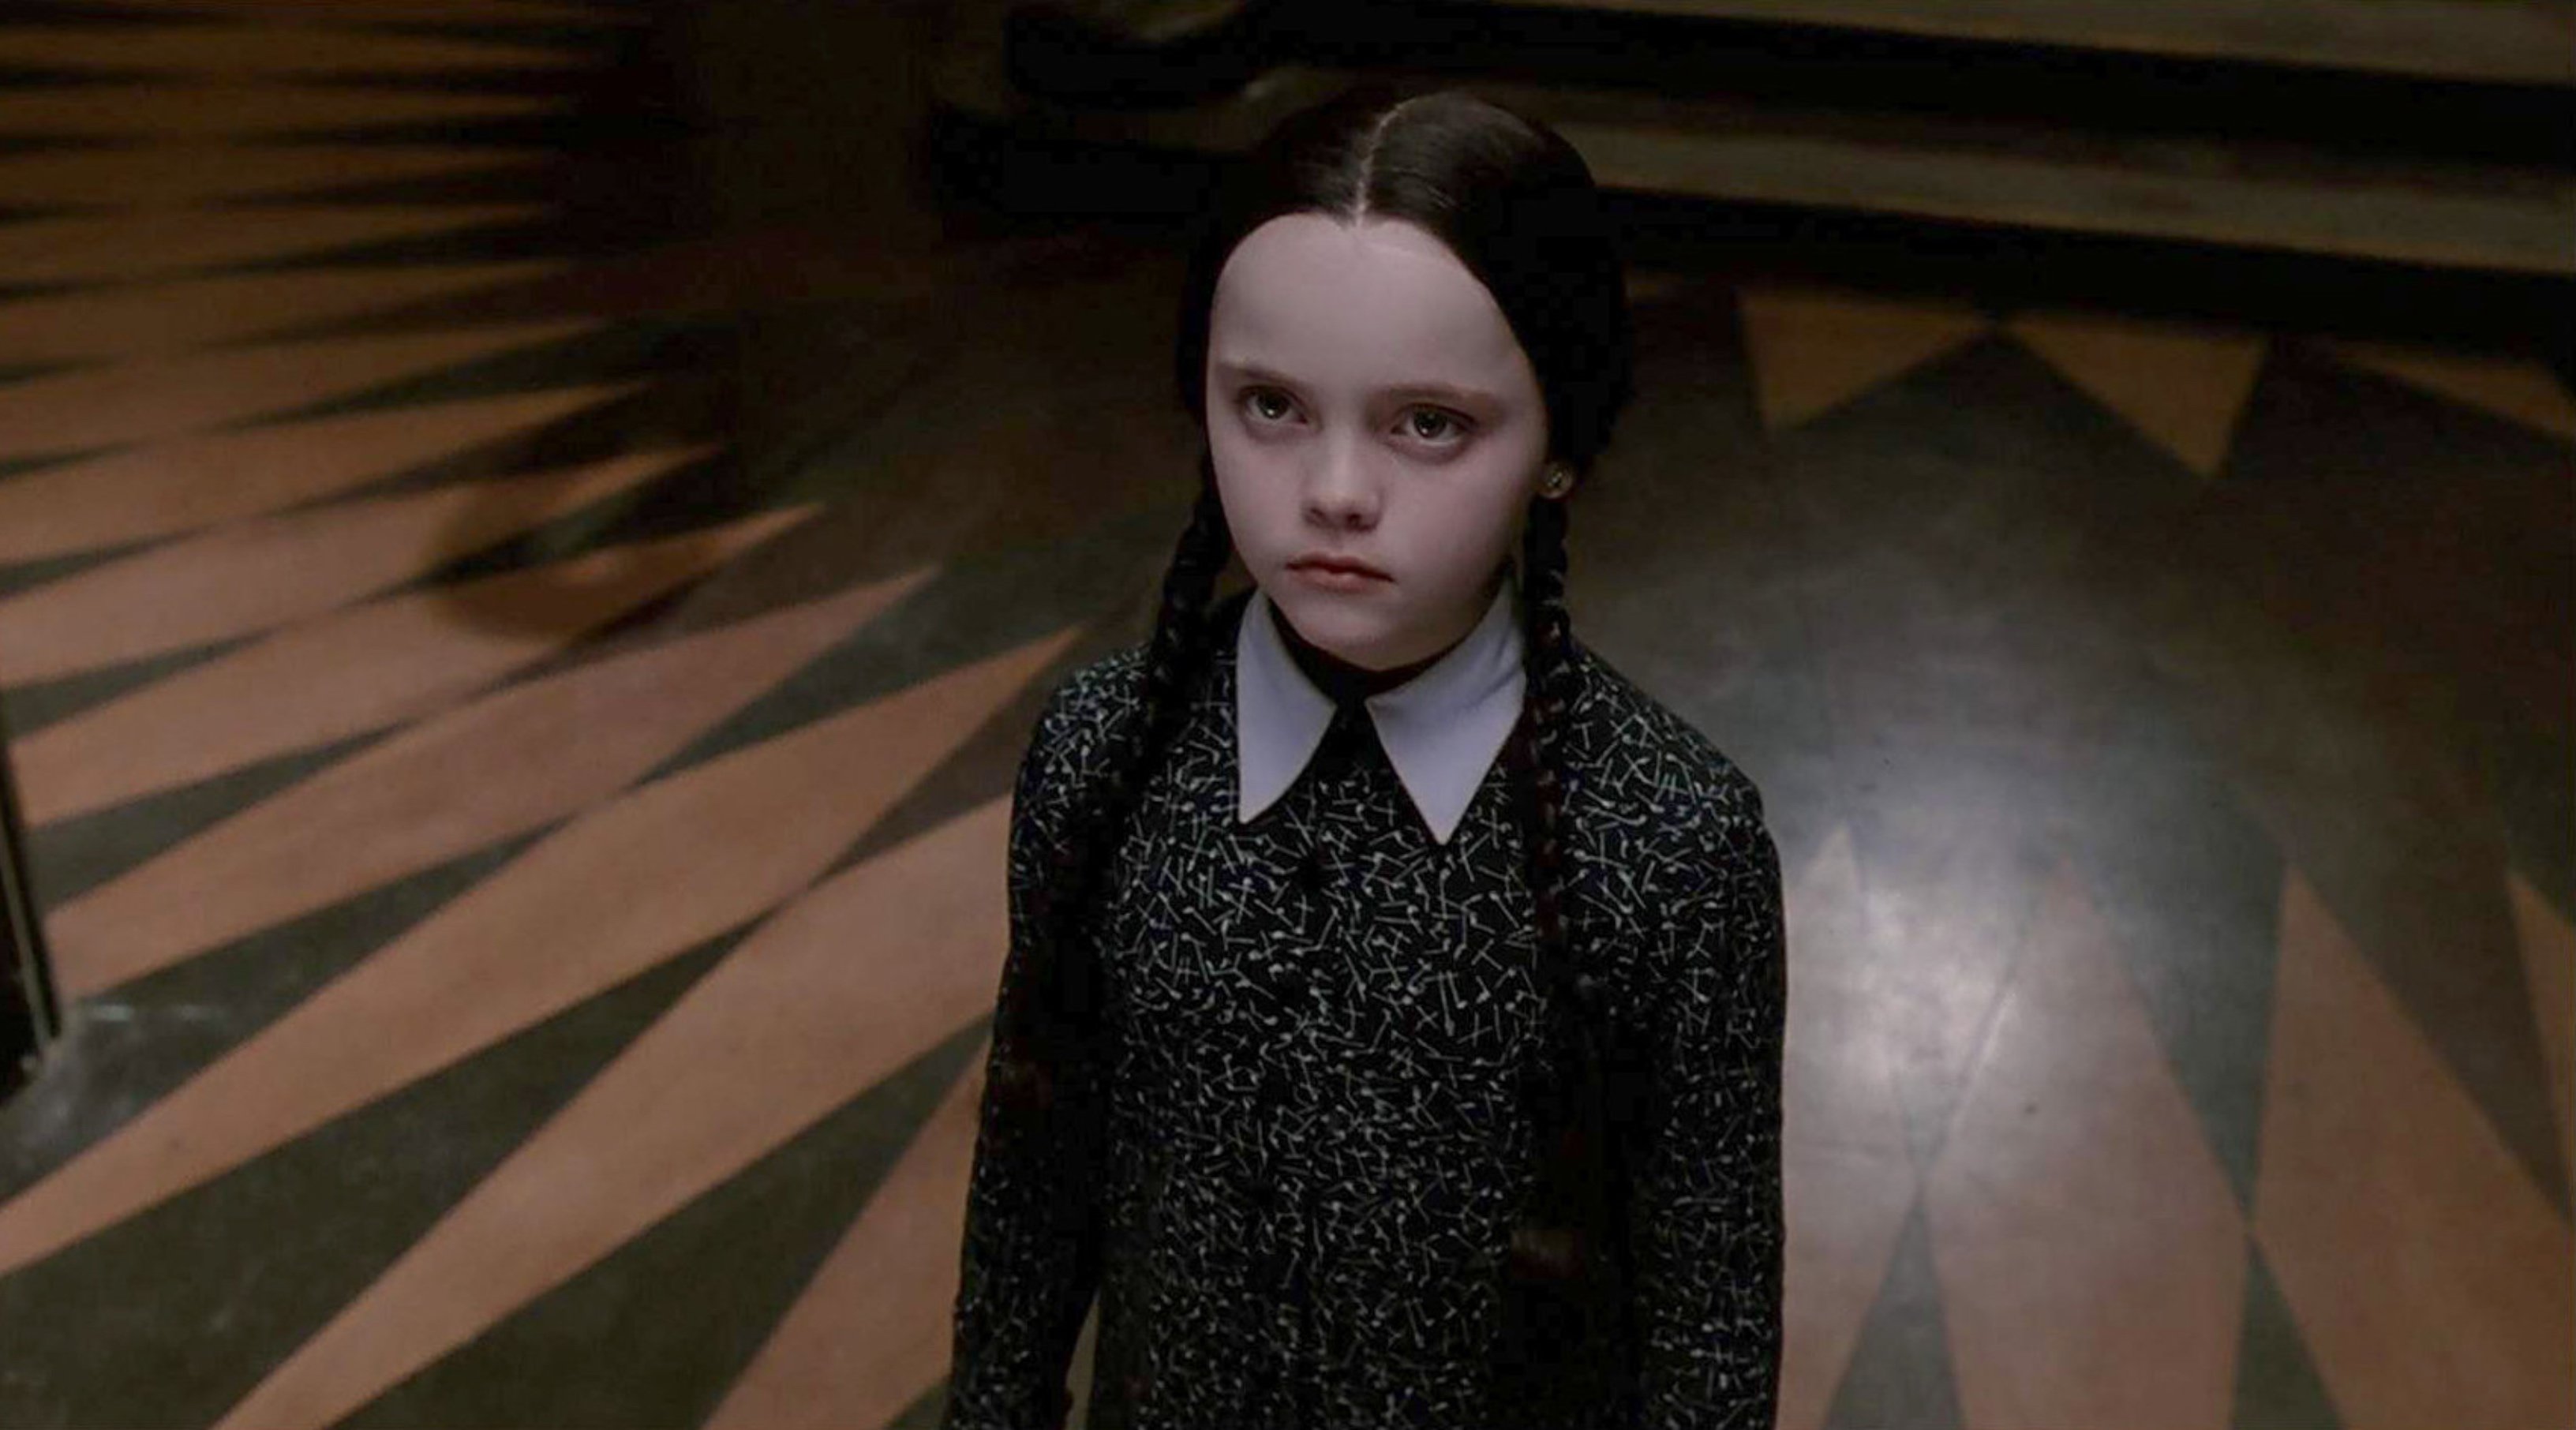 Christina Ricci 'The Addams Family' dressed as Wednesday Addams in black dress